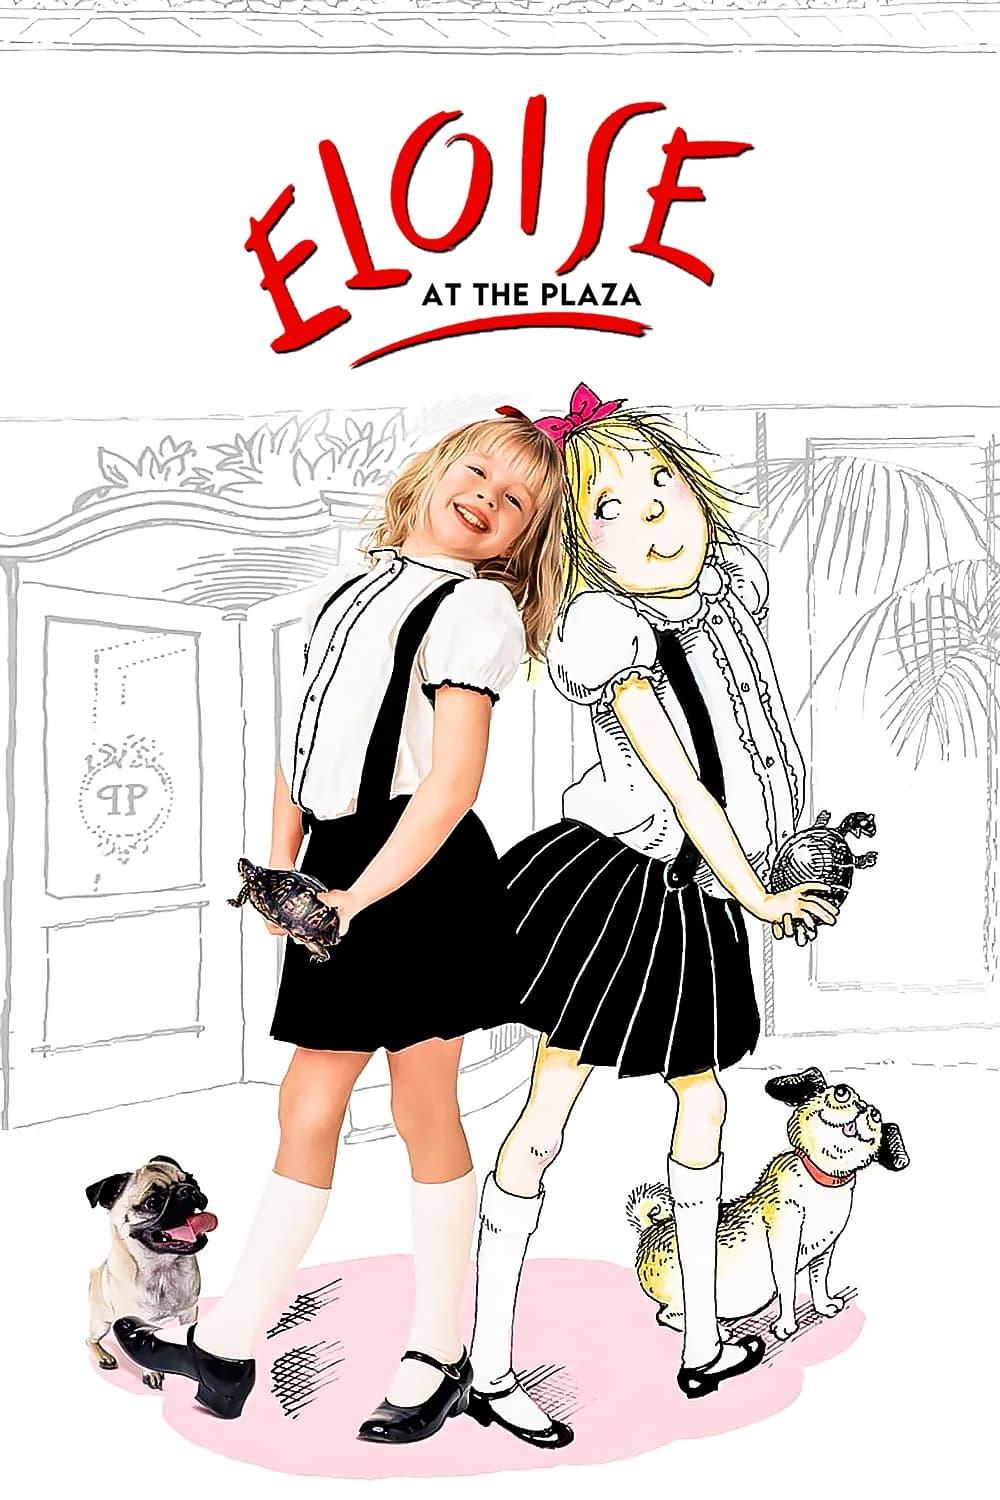 Eloise at the Plaza poster